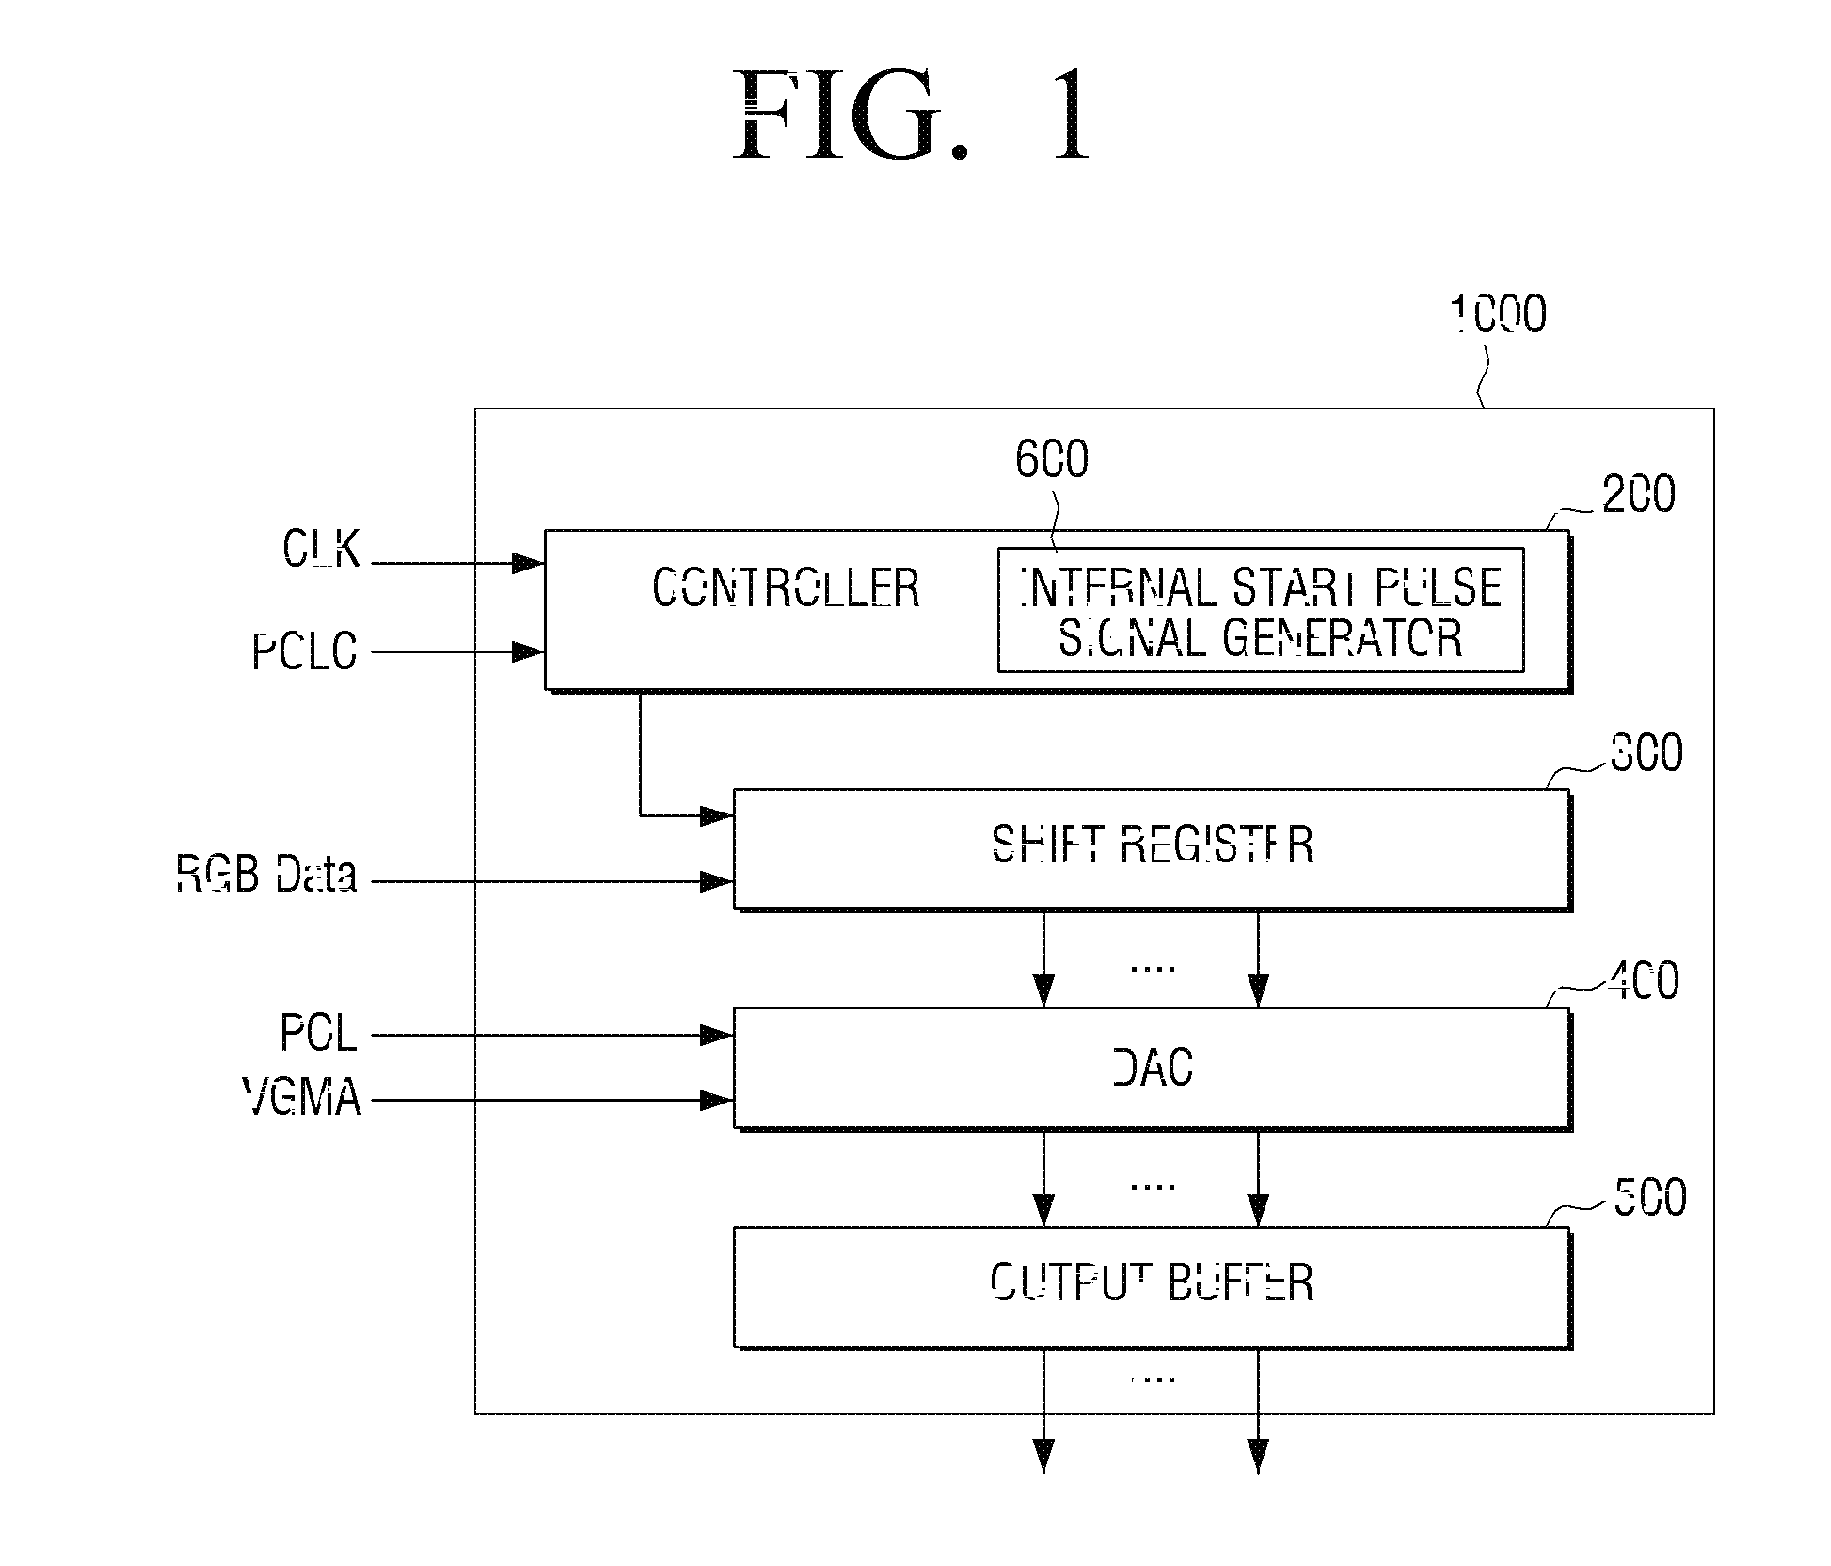 Source driver, controller, and method for driving source driver